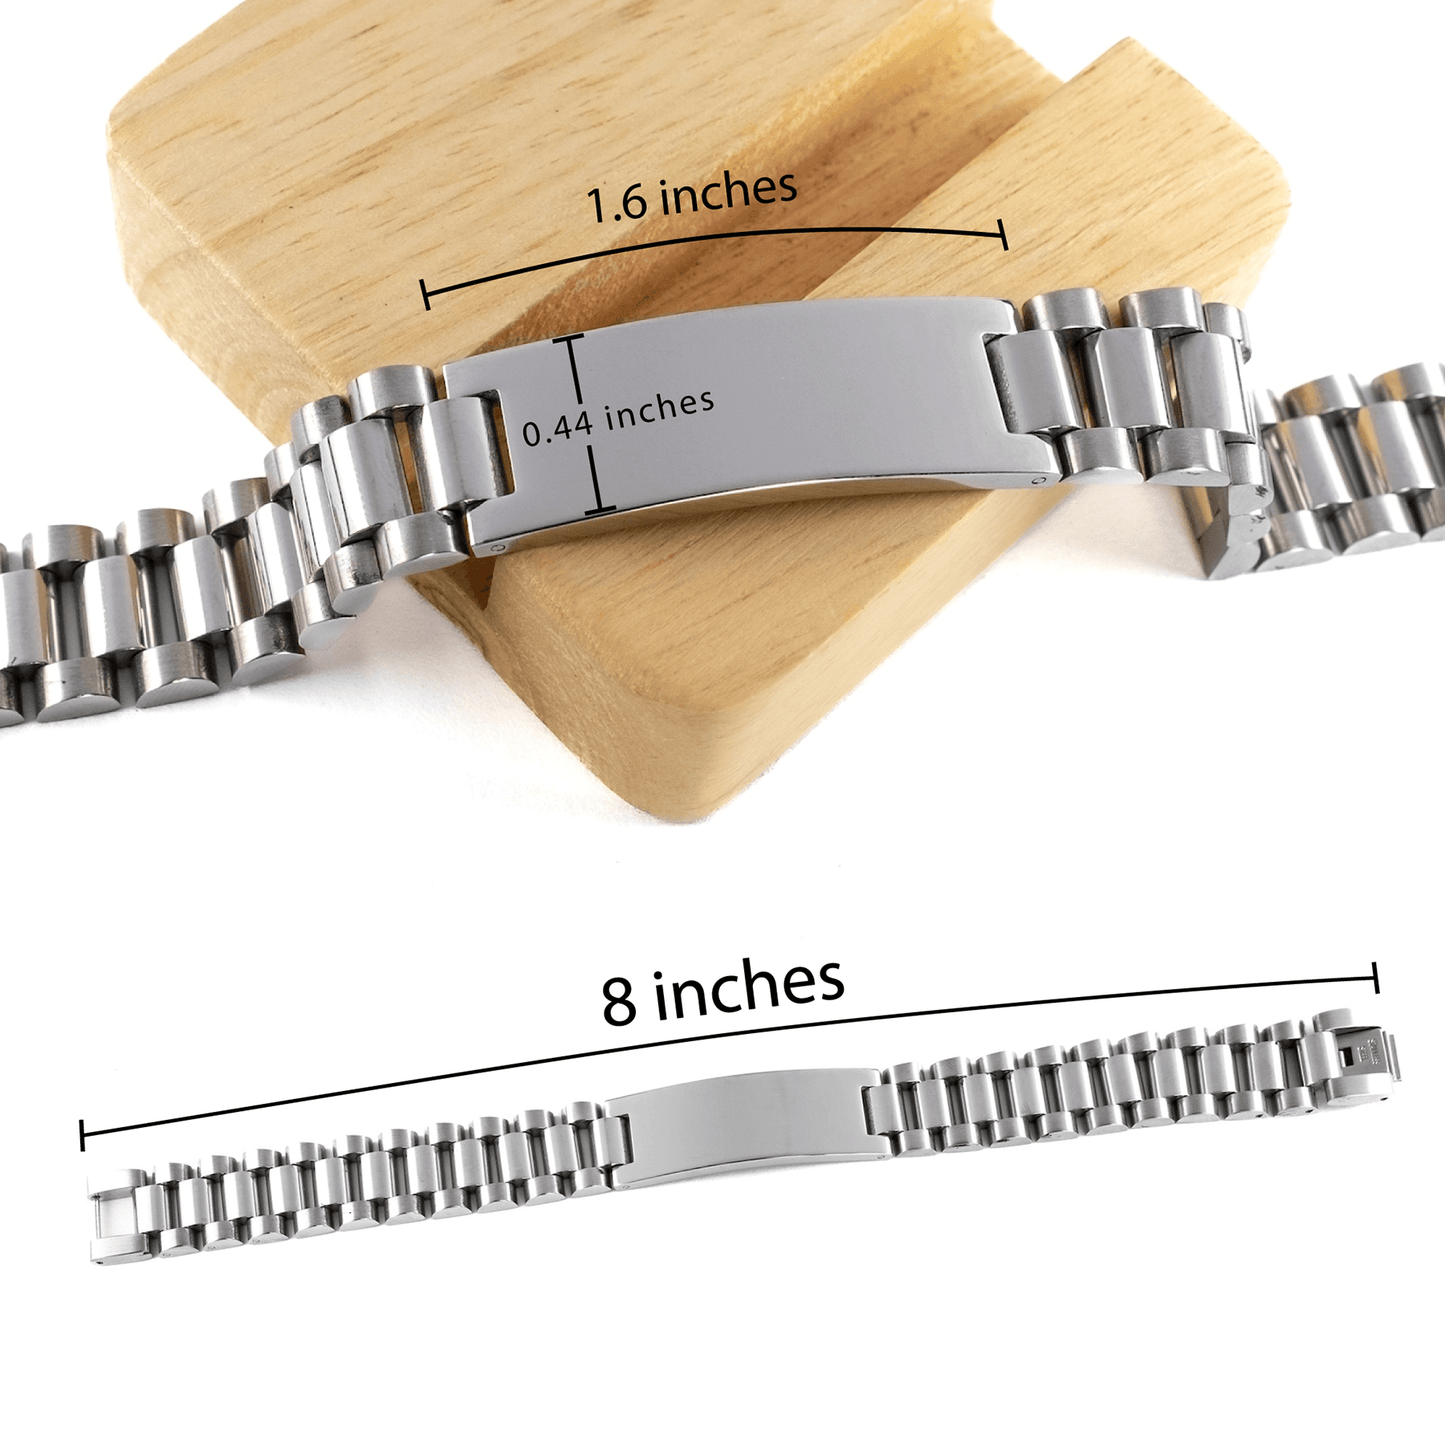 Remarkable Auditor Gifts, Your dedication and hard work, Inspirational Birthday Christmas Unique Ladder Stainless Steel Bracelet For Auditor, Coworkers, Men, Women, Friends - Mallard Moon Gift Shop